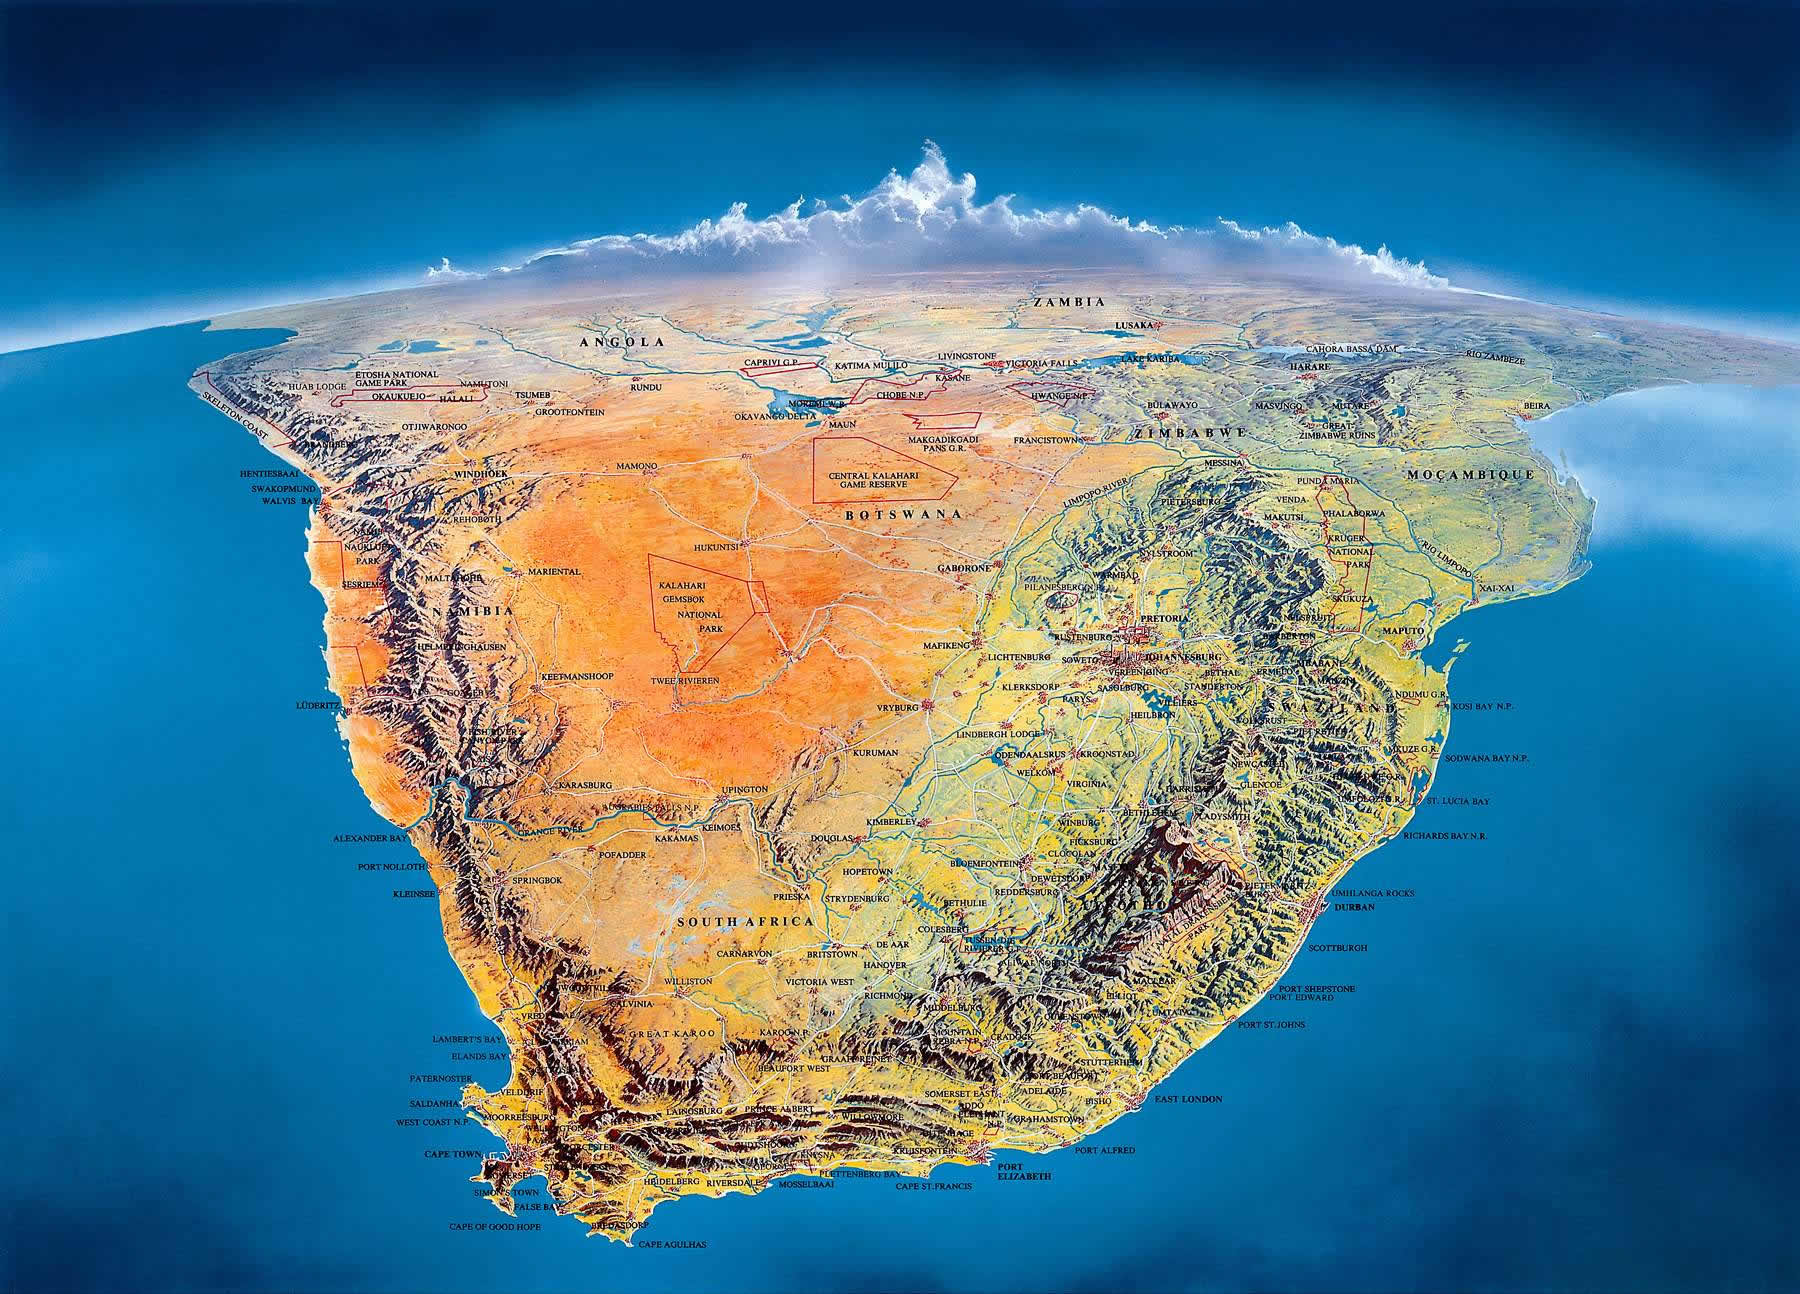 Detailed Map of South Africa, its Provinces and its Major Cities.